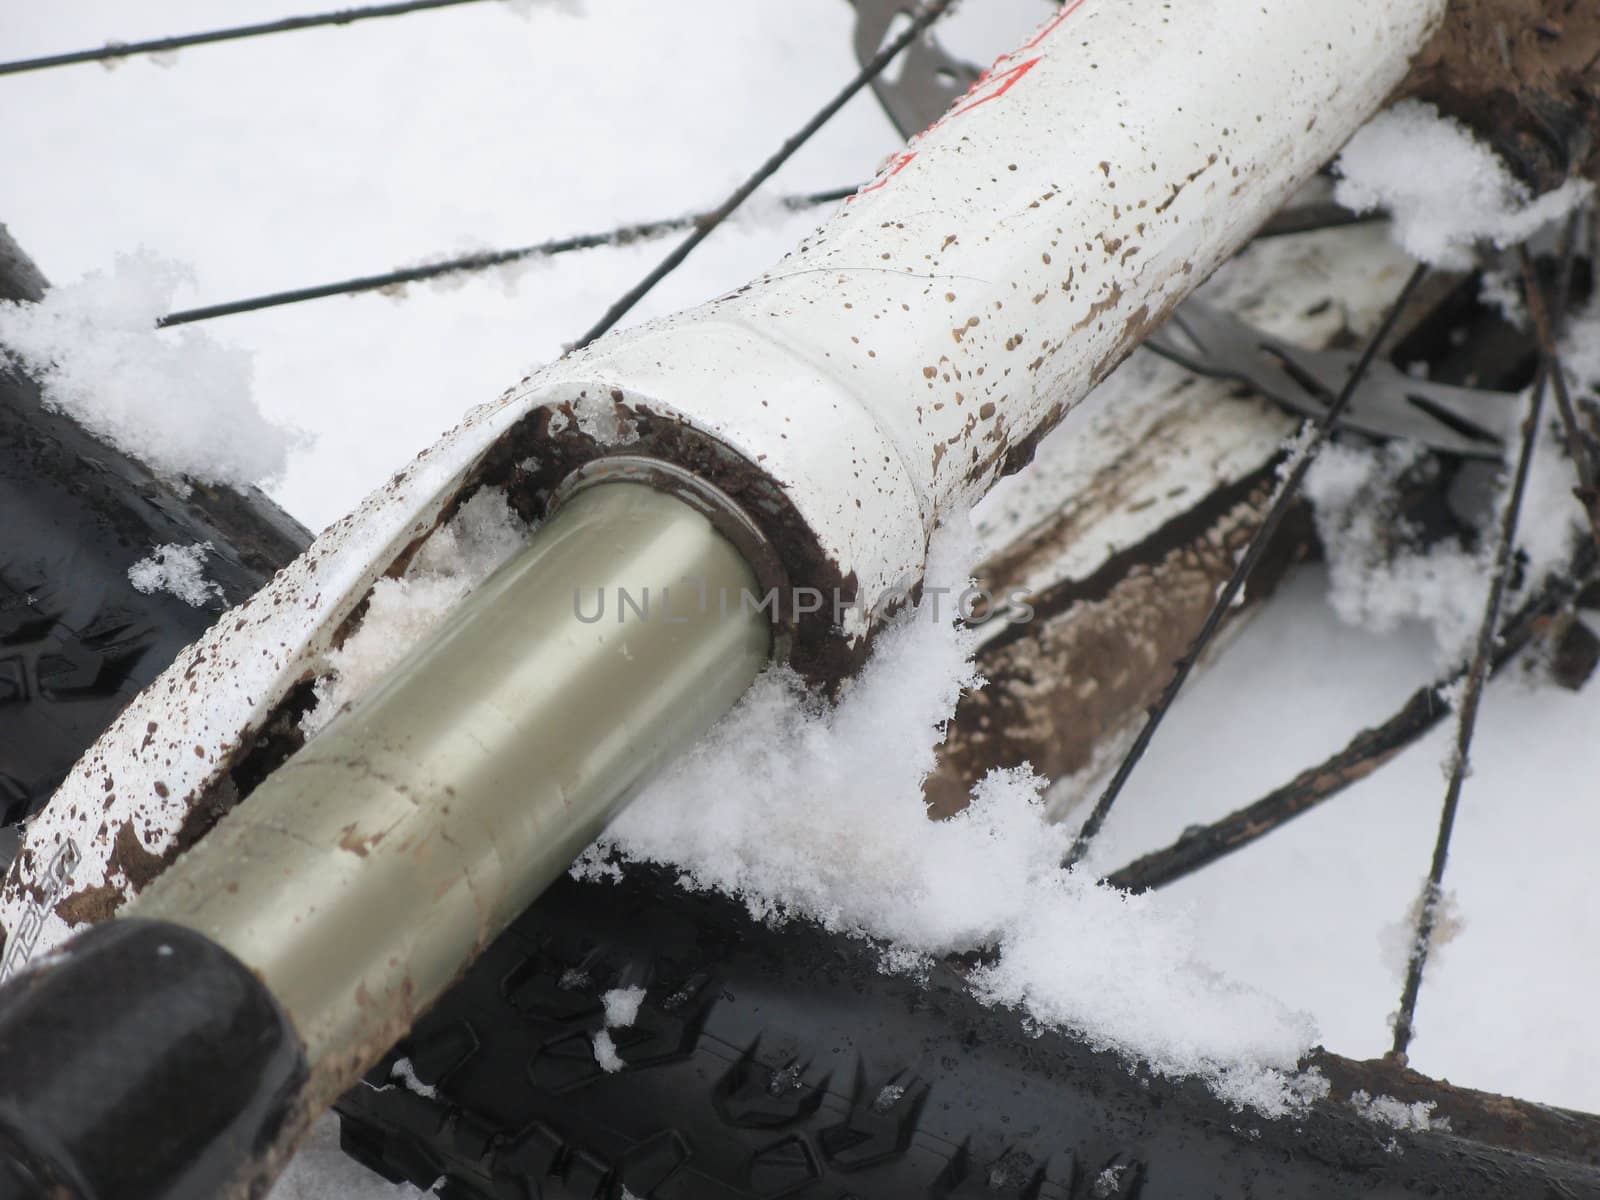 Mountain bike forks in snow by chrisga